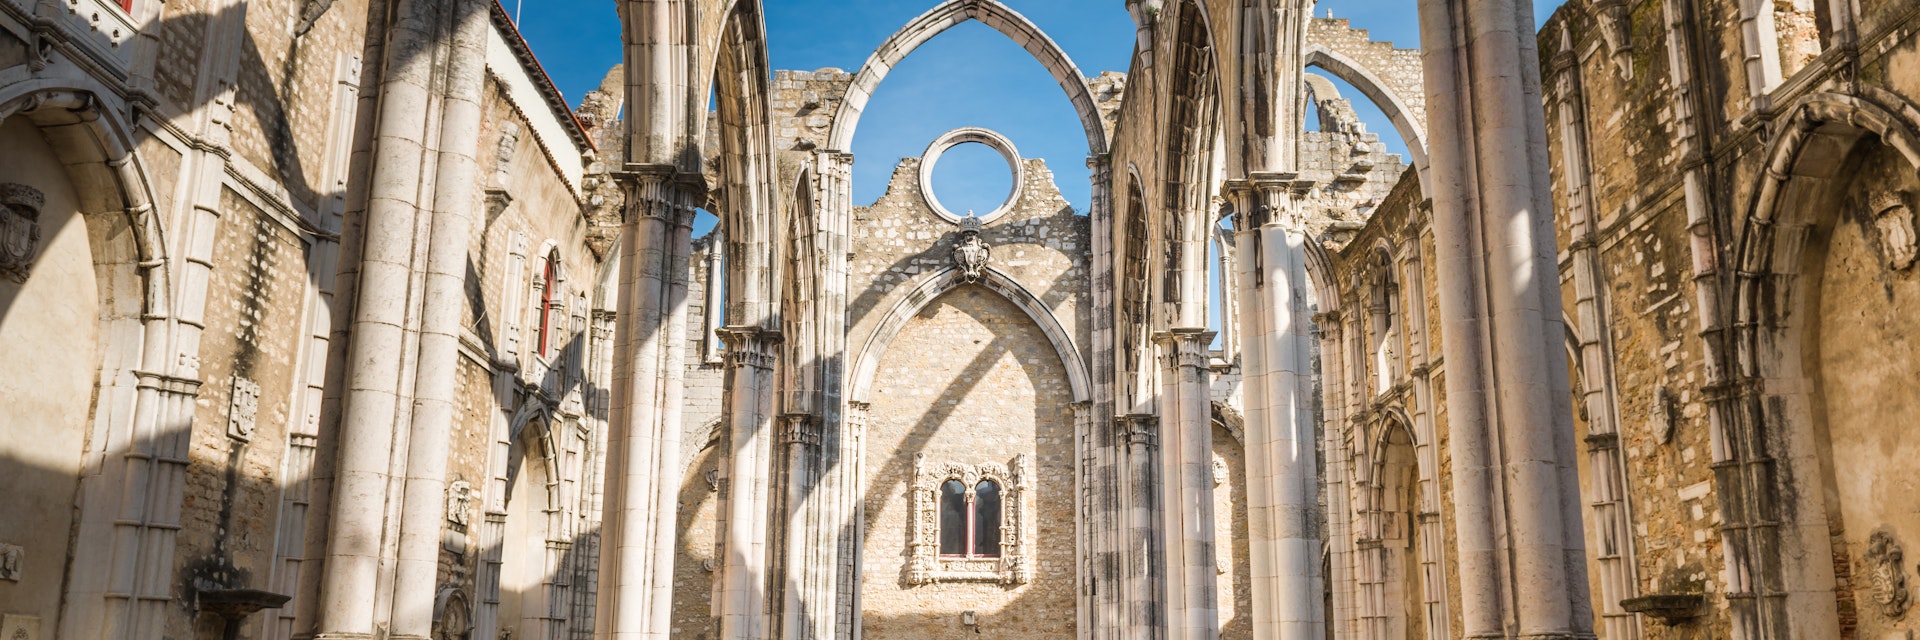 Lisbon, Portugal - 12. October 2015. Interiors of the roofless Carmo Convent in Lisbon, ruined by the earthquake
496913698
Travel, Building Exterior, Nave, Convent, Gothic Style, Blue, Damaged, Open, Construction Industry, Architecture, Outdoors, Image, Lisbon, Portugal, Europe, Earthquake, Sky, Roof, Cathedral, Church, Old Ruin, Built Structure, Carmo, roofless